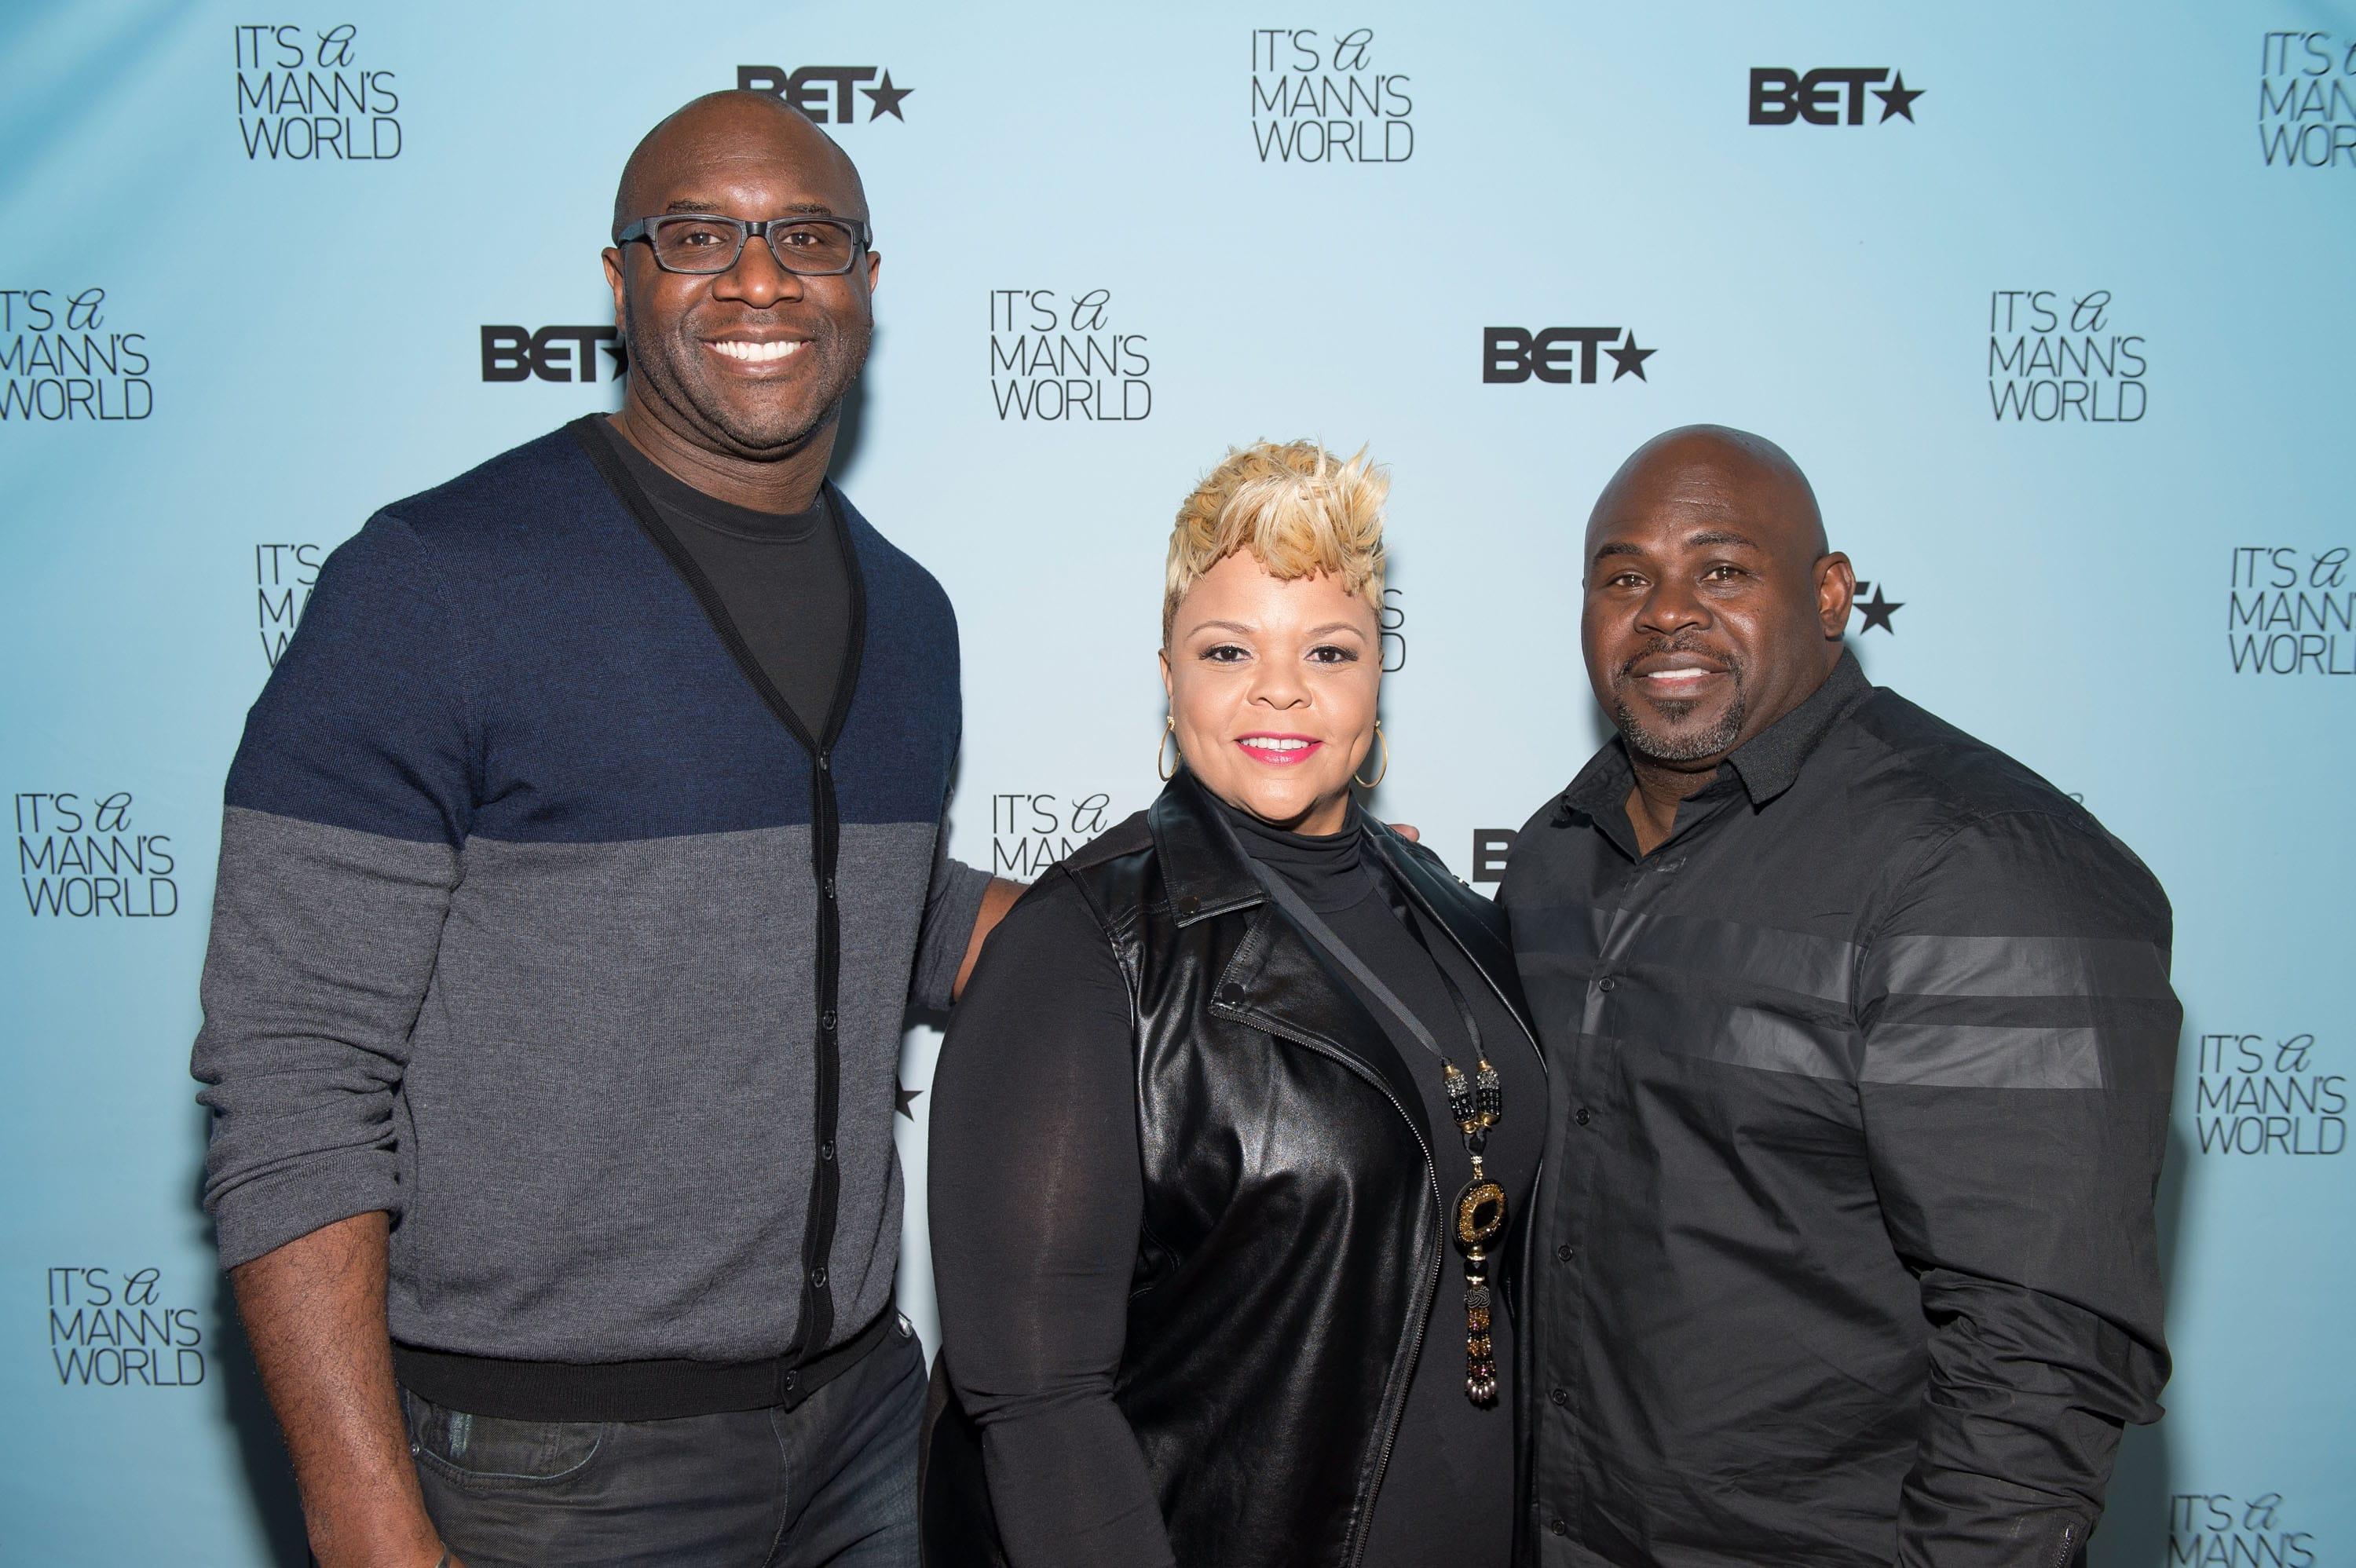 ATLANTA, GEORGIA - FEBRUARY 16: Executive Producer Roger M. Bobb, singer and actress Tamela Mann, and actor David Mann attend 'It's a Mann's World' season two luncheon screening at TRACE at the W on February 16, 2016 in Atlanta, Georgia. (Photo by Marcus Ingram/BET/Getty Images for BET)